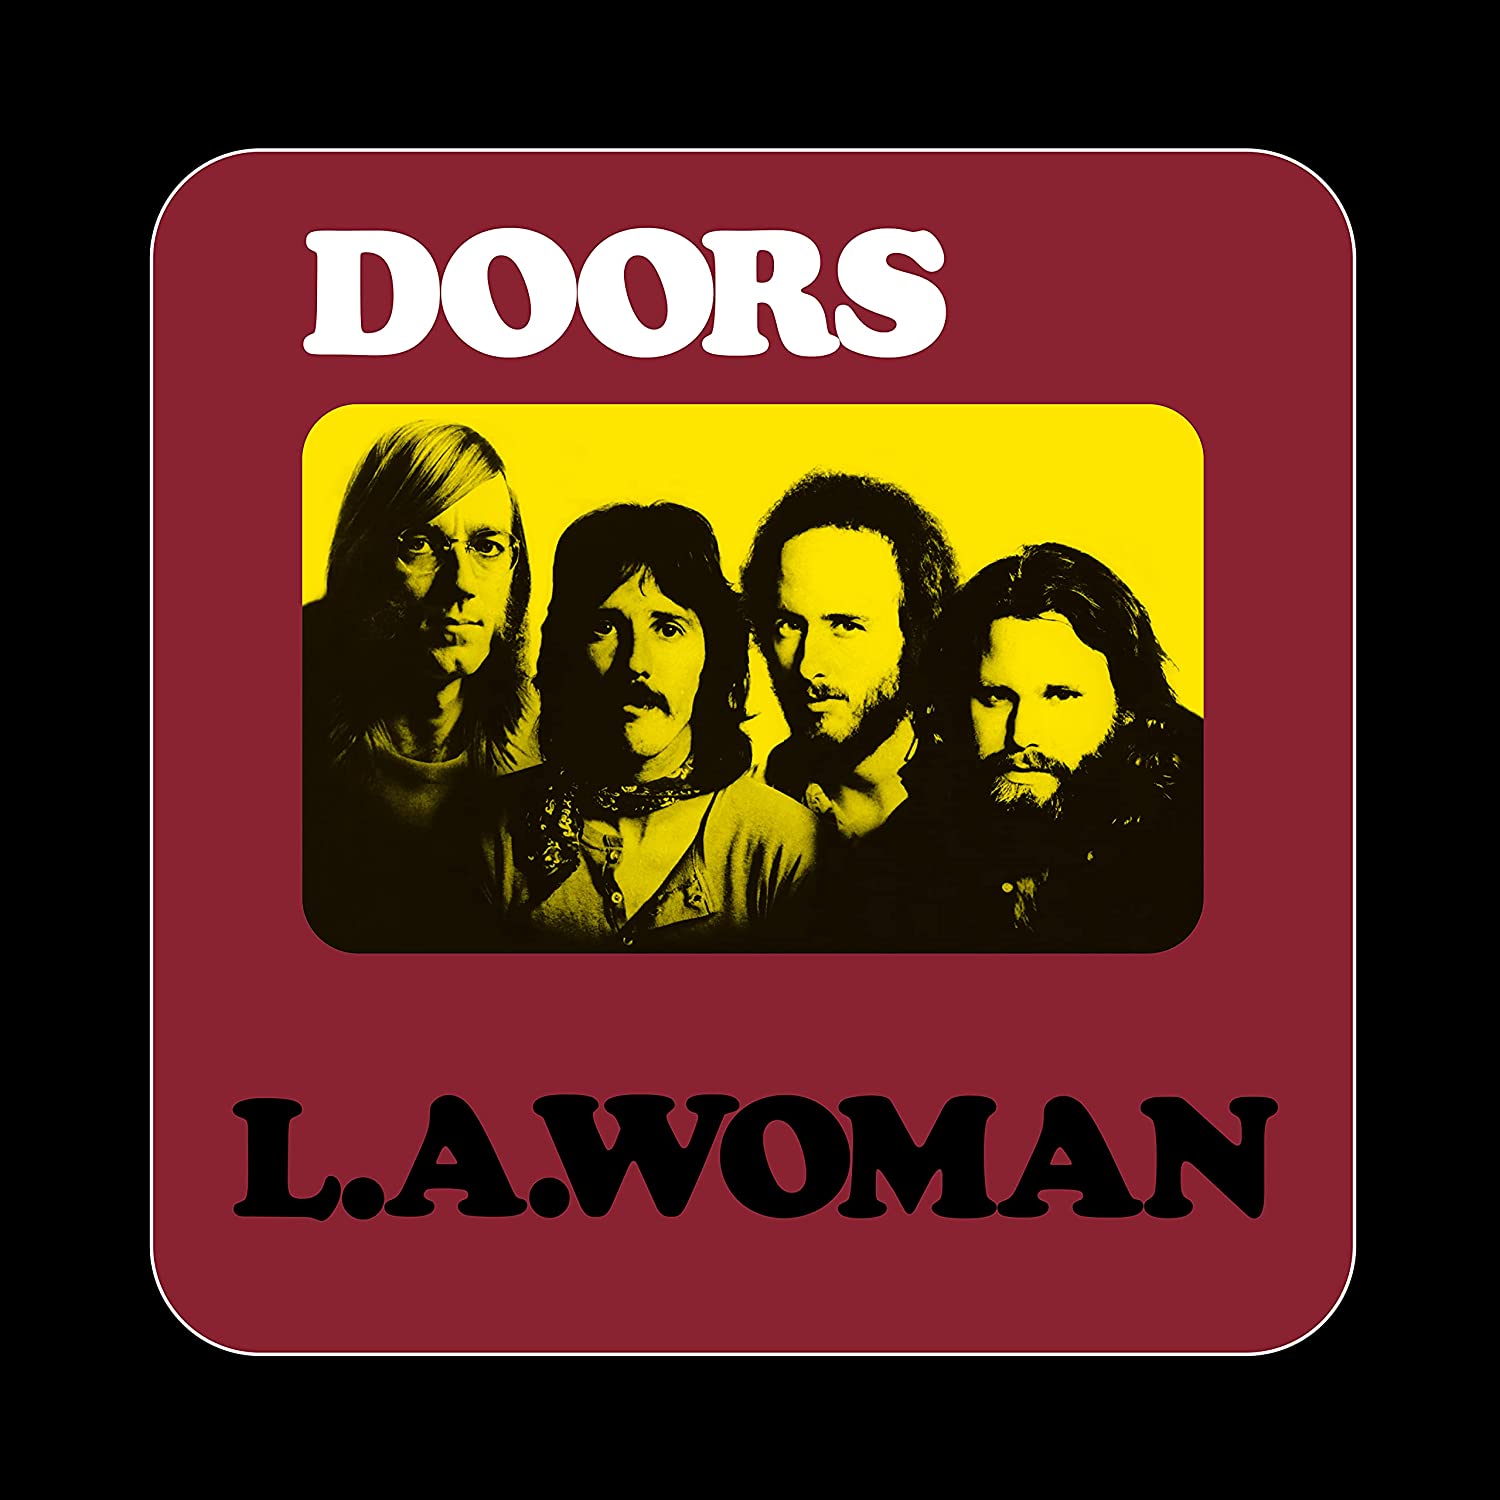 Doors L.a. Woman (50th Anniversary Deluxe Edition) (lp+cd)